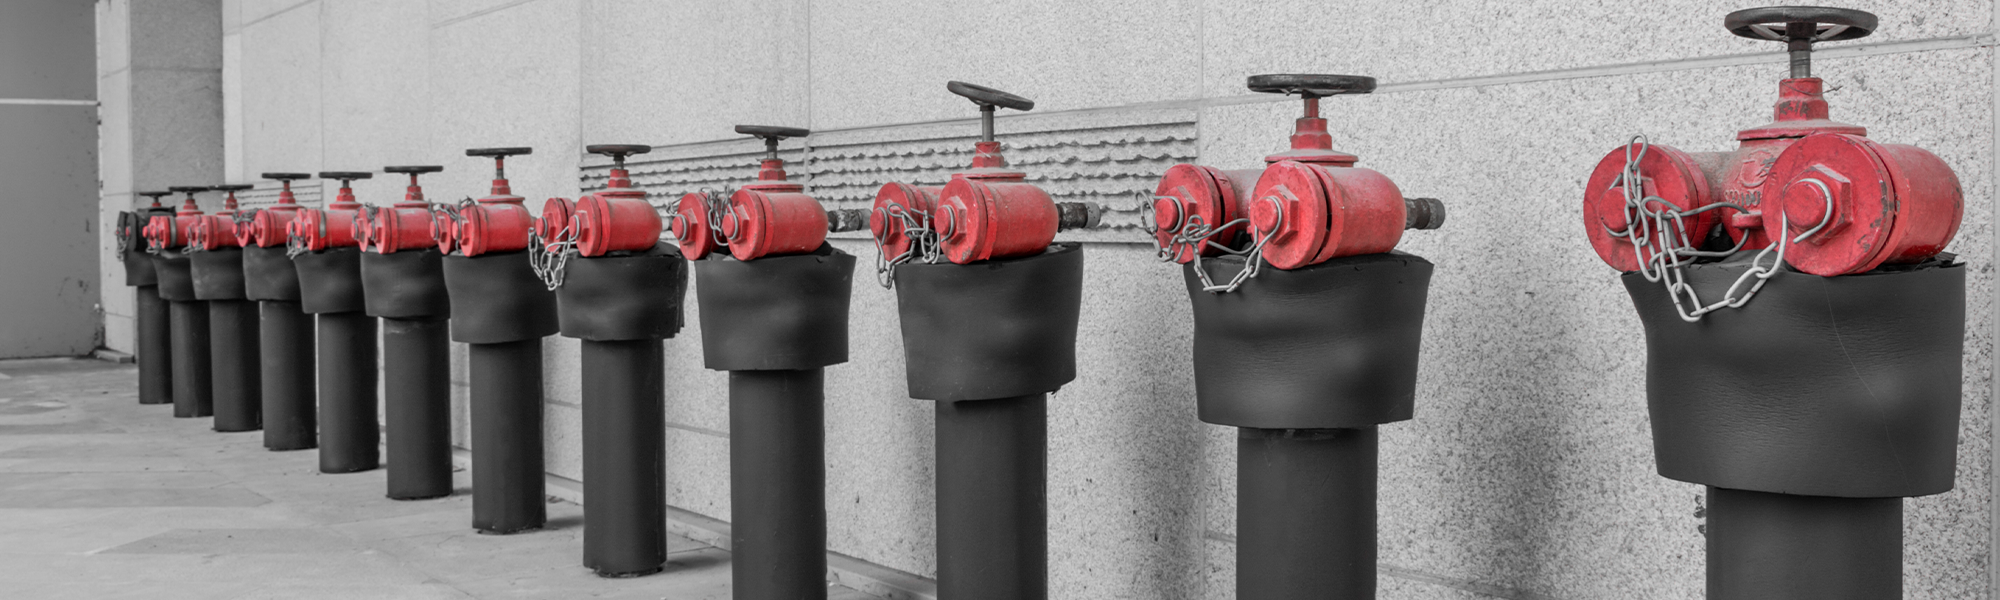 <p>Fire Hydrant Systems for Warehouses</p>
